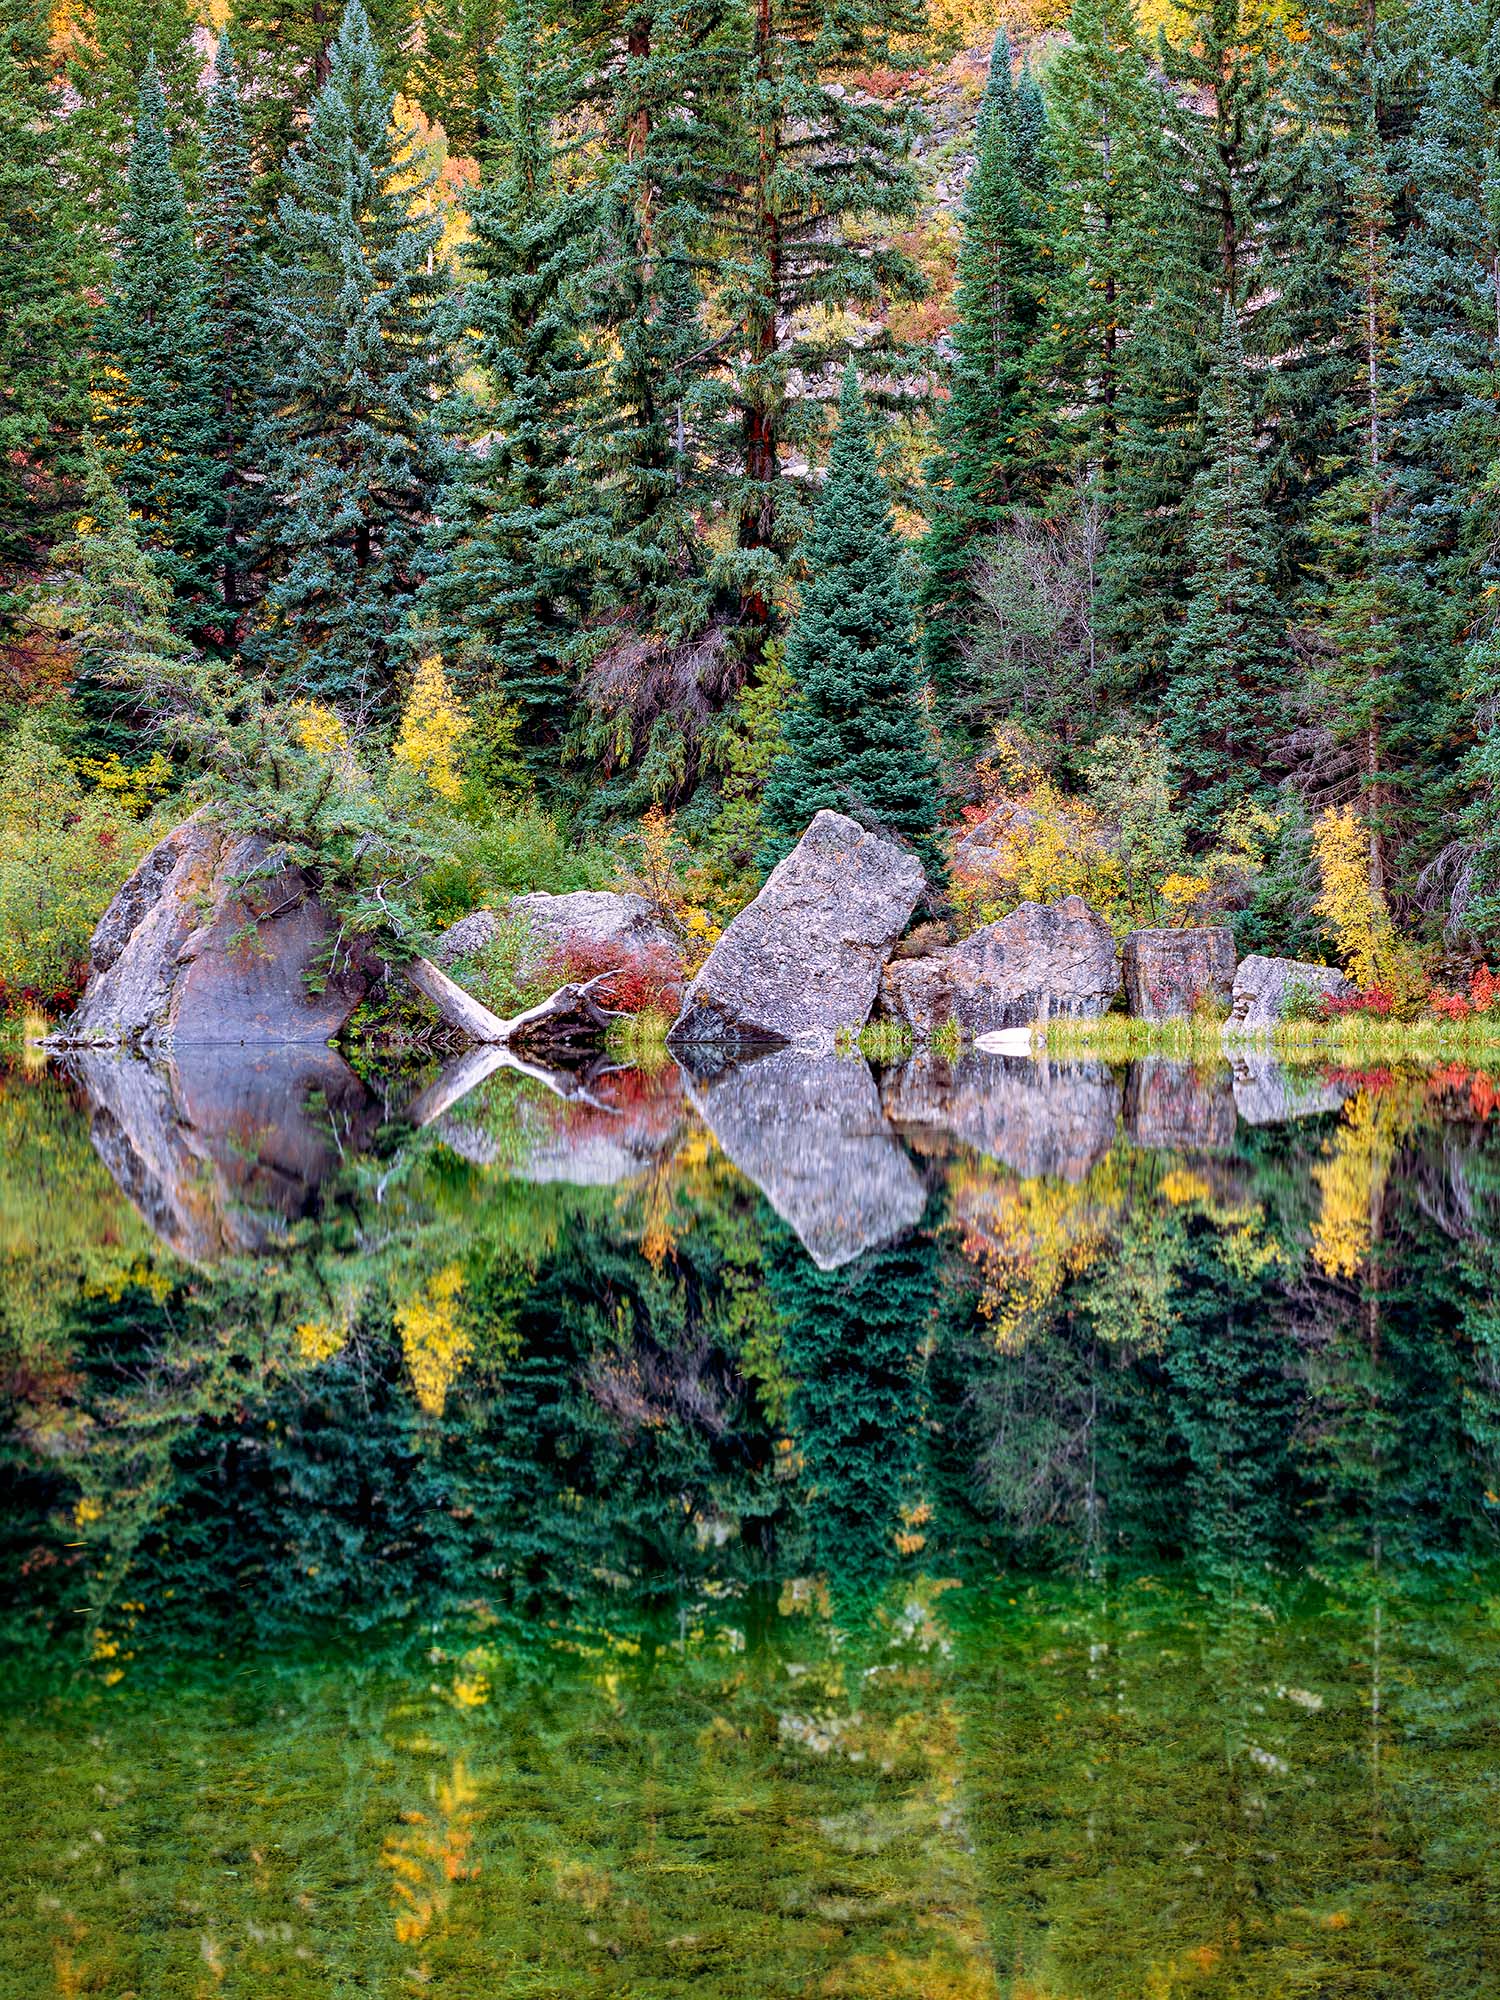 This image reveals the mirrored beauty of rocks and vibrant green and yellow vegetation reflected in Lizard Lake, Colorado. To...